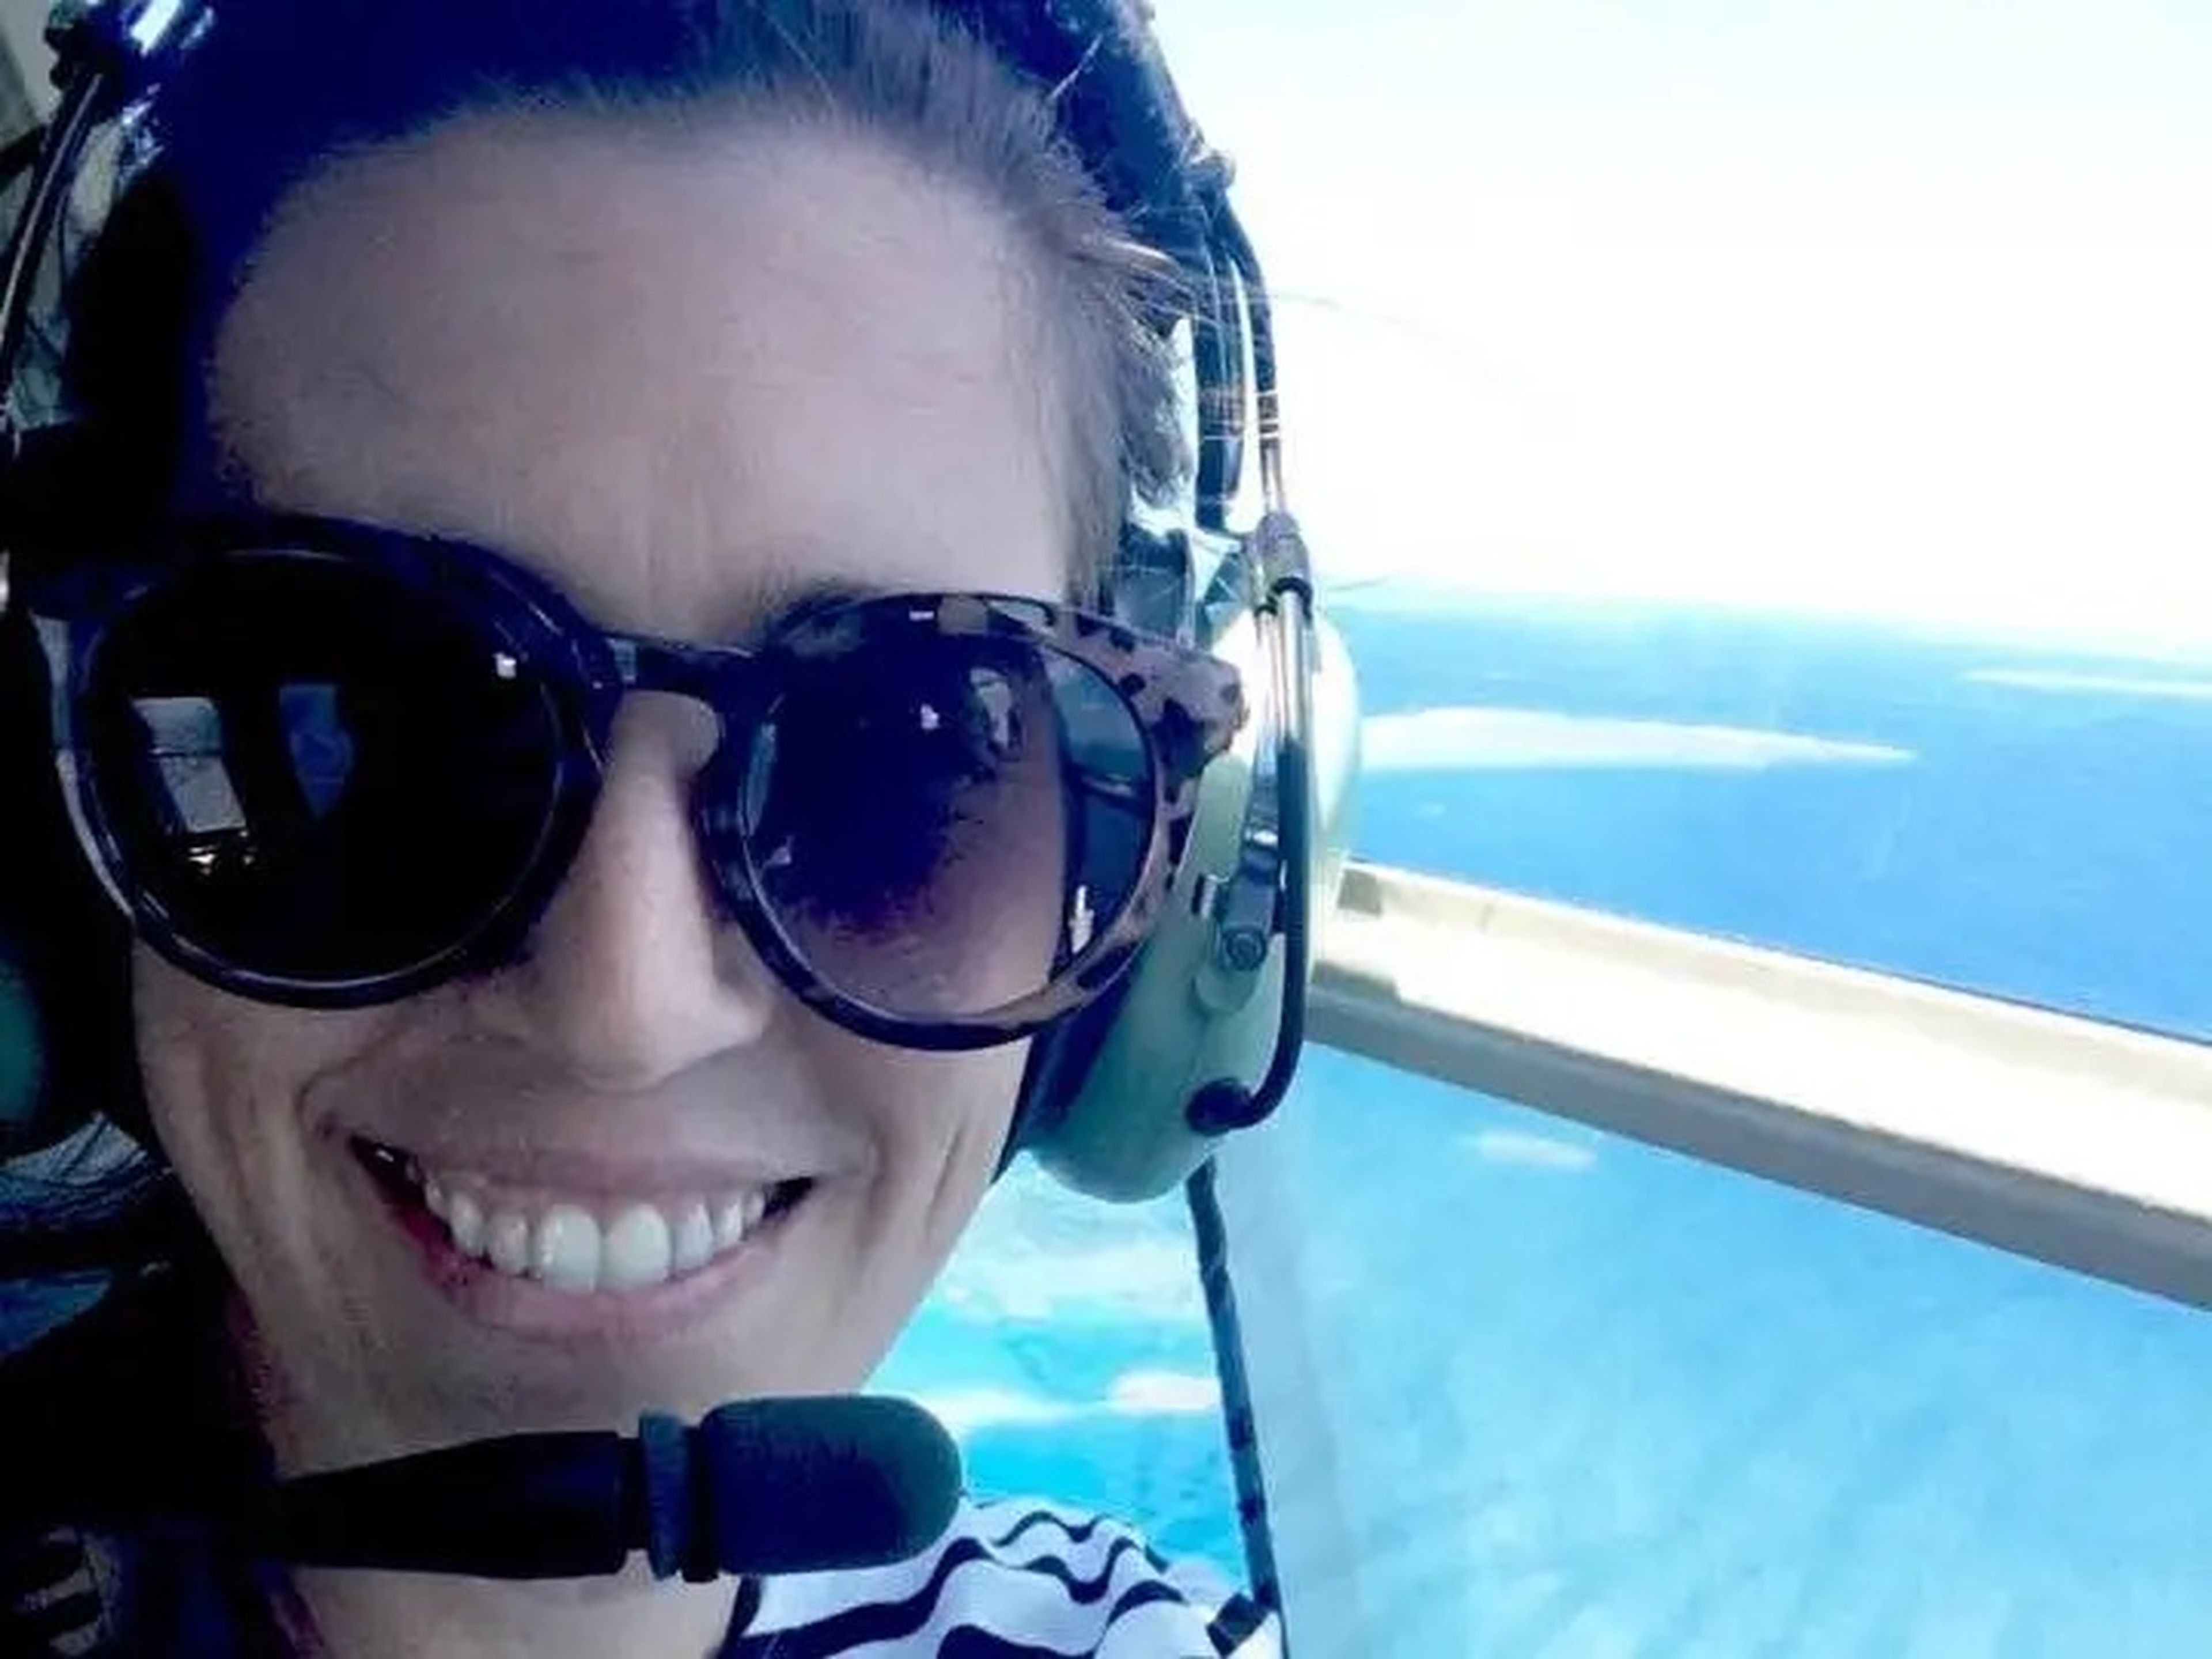 Michelle Gross on a helicopter as she makes her way from Port Douglas to the Great Barrier Reef in Australia.